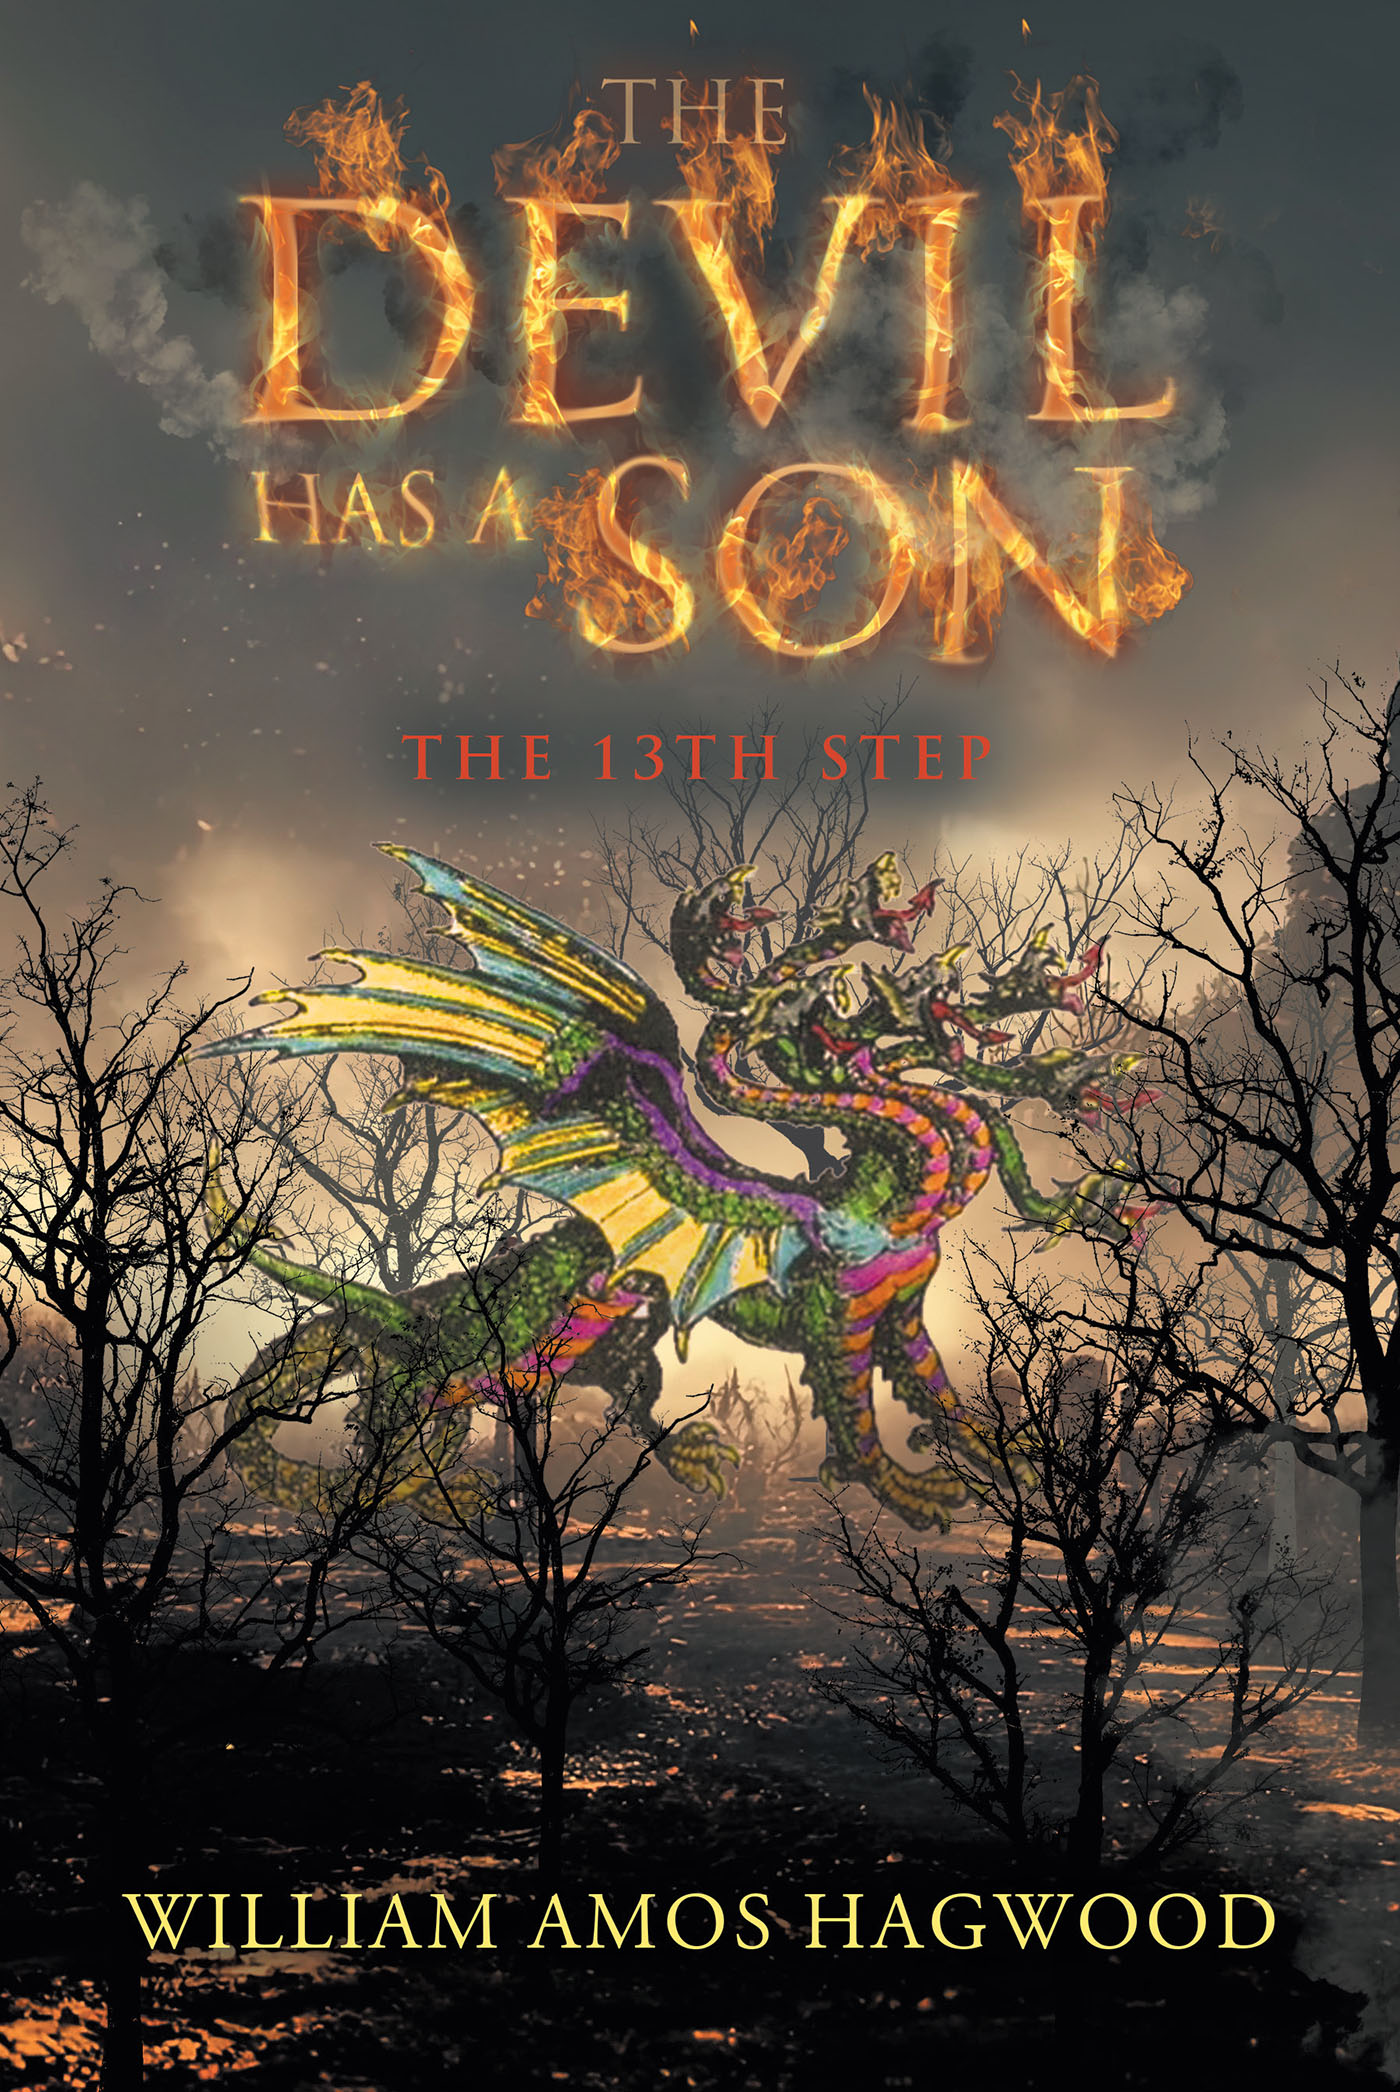 Author William Amos Hagwood’s New Book, “The Devil Has a Son: The 13th Step,” Shares the Author’s Emotionally Taxing Experience of Spiritual Despair